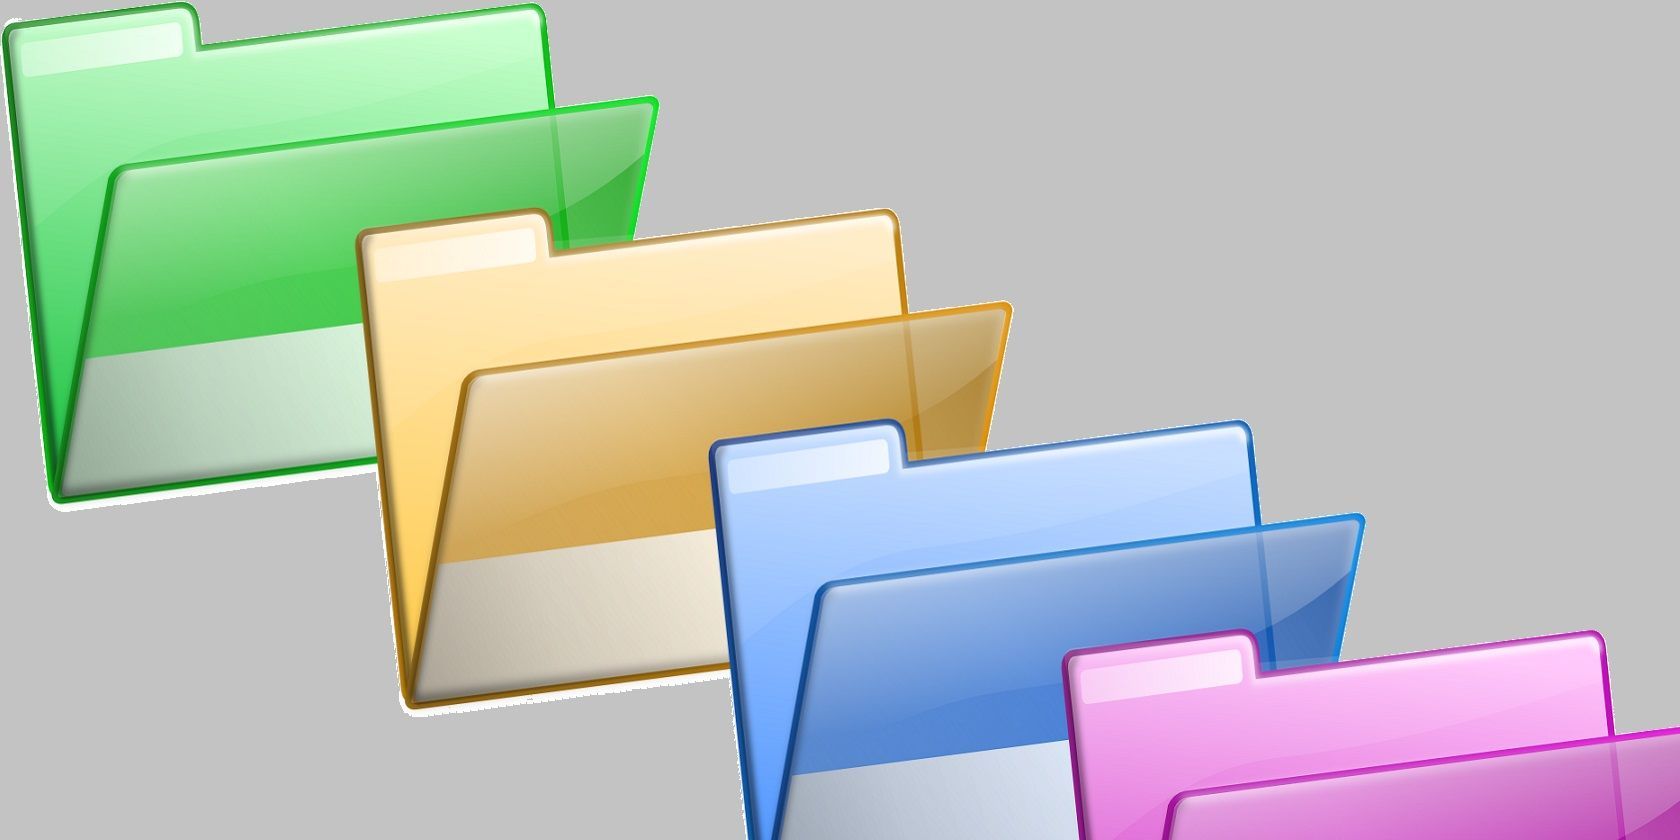 Did You Lose Files While Cutting and Pasting Them in Windows? Here's What to Do Next